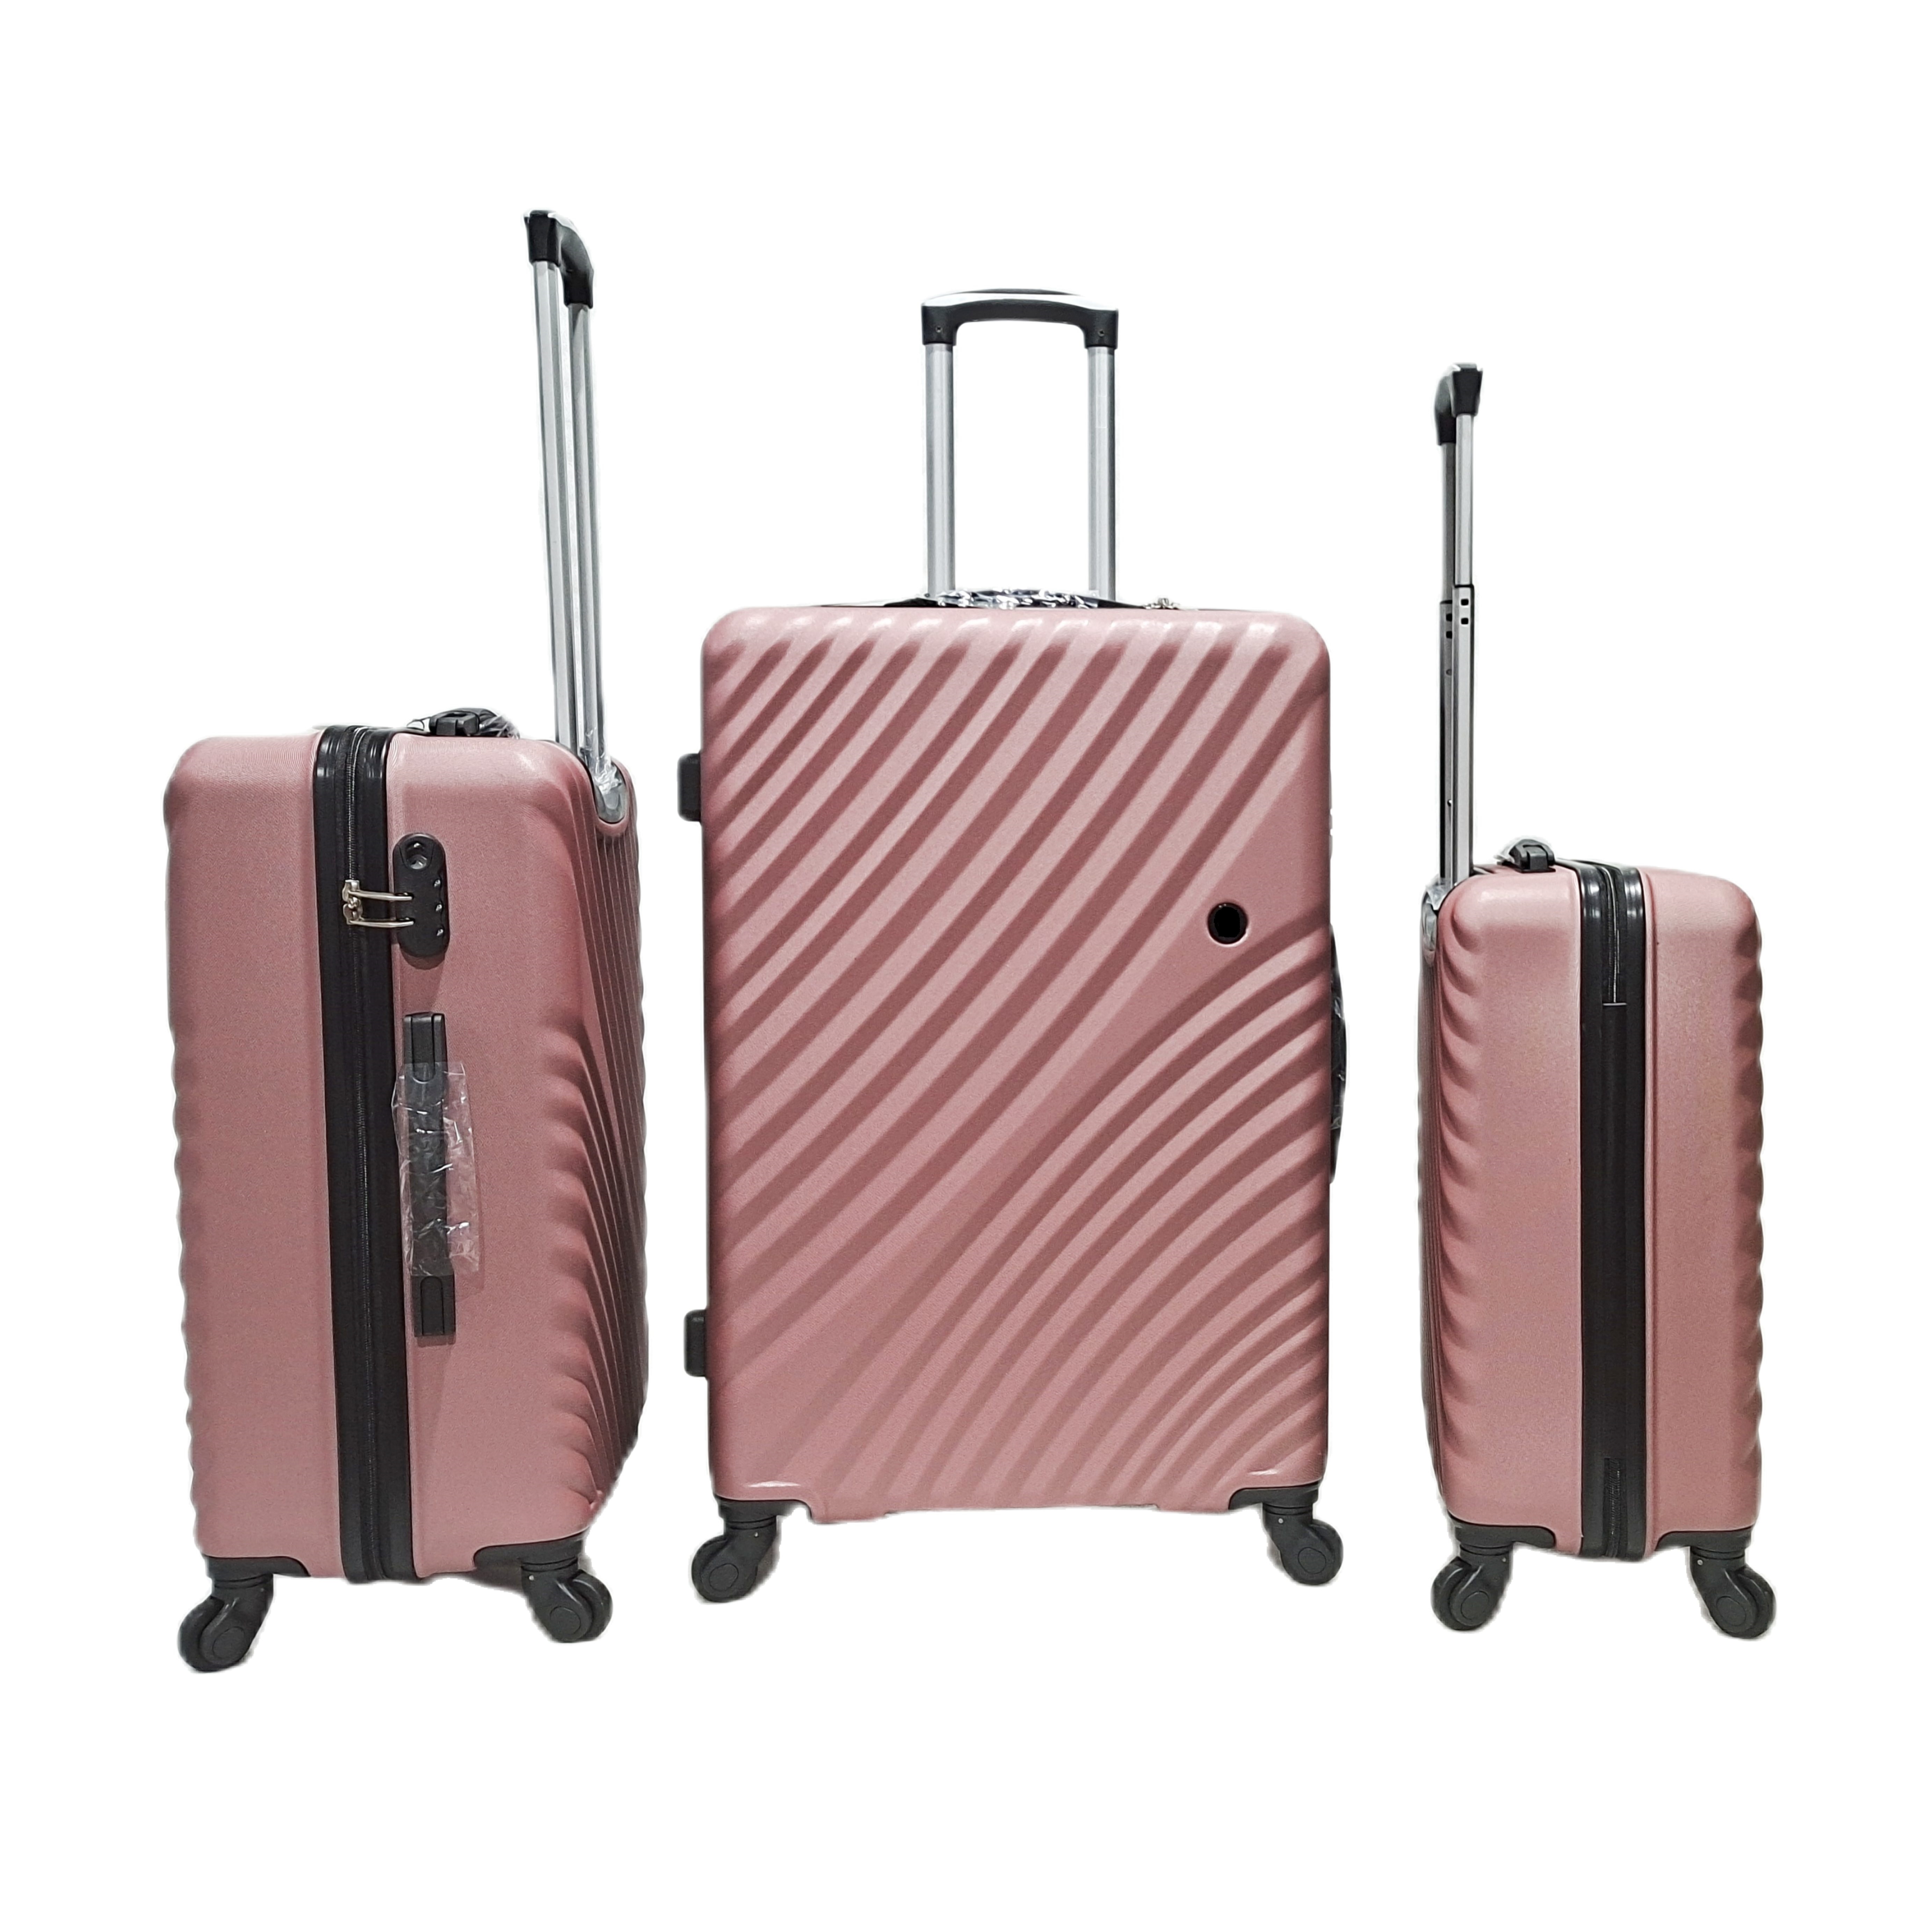 New Design ABS Suitcases Luggage Travel Bags 4 Spinner Wheel Trolley Suitcase Set